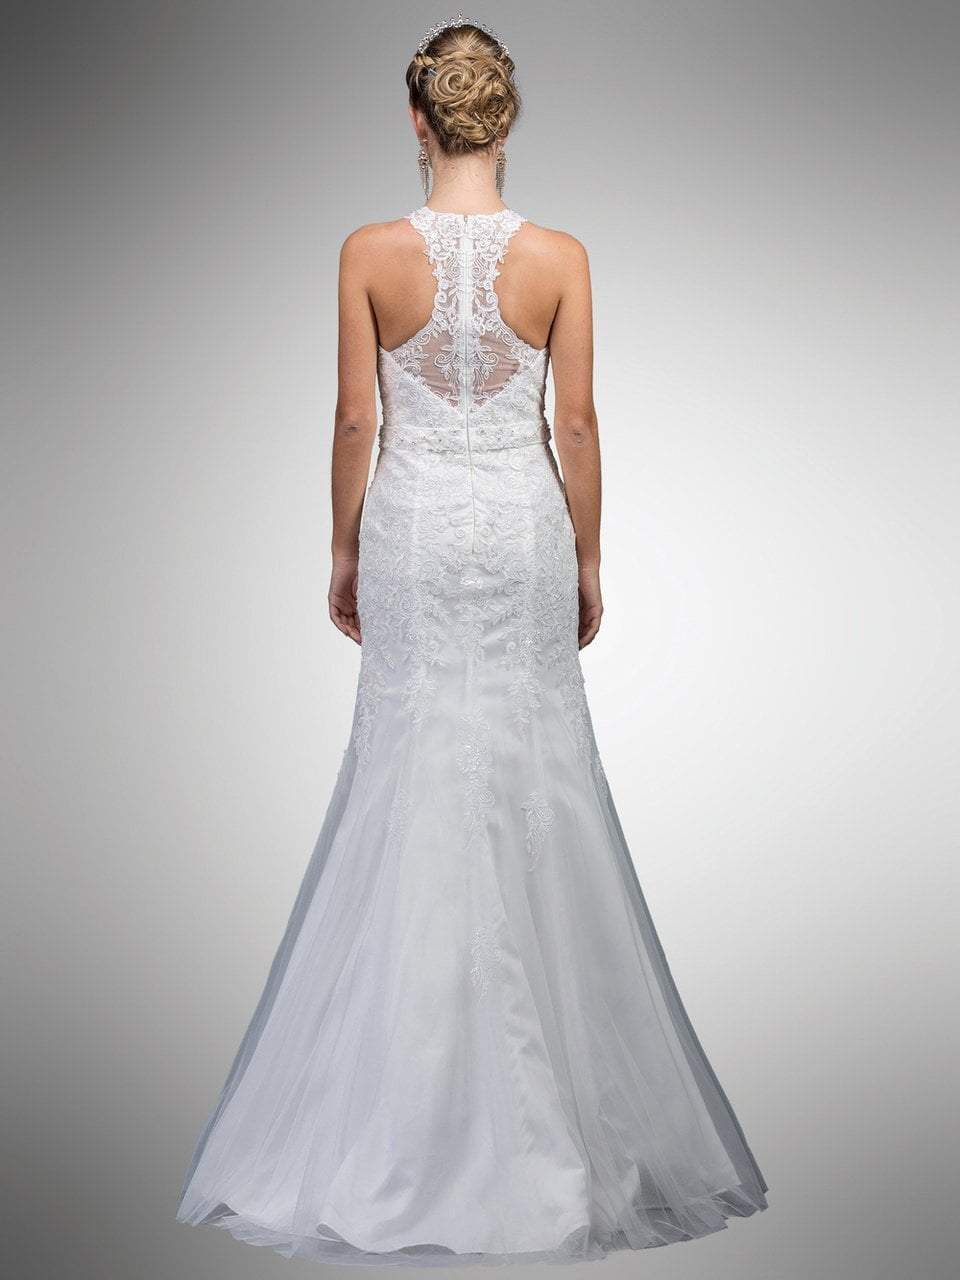 Dancing Queen Bridal - A7003 Beaded Lace Illusion Halter Mermaid Gown Special Occasion Dress